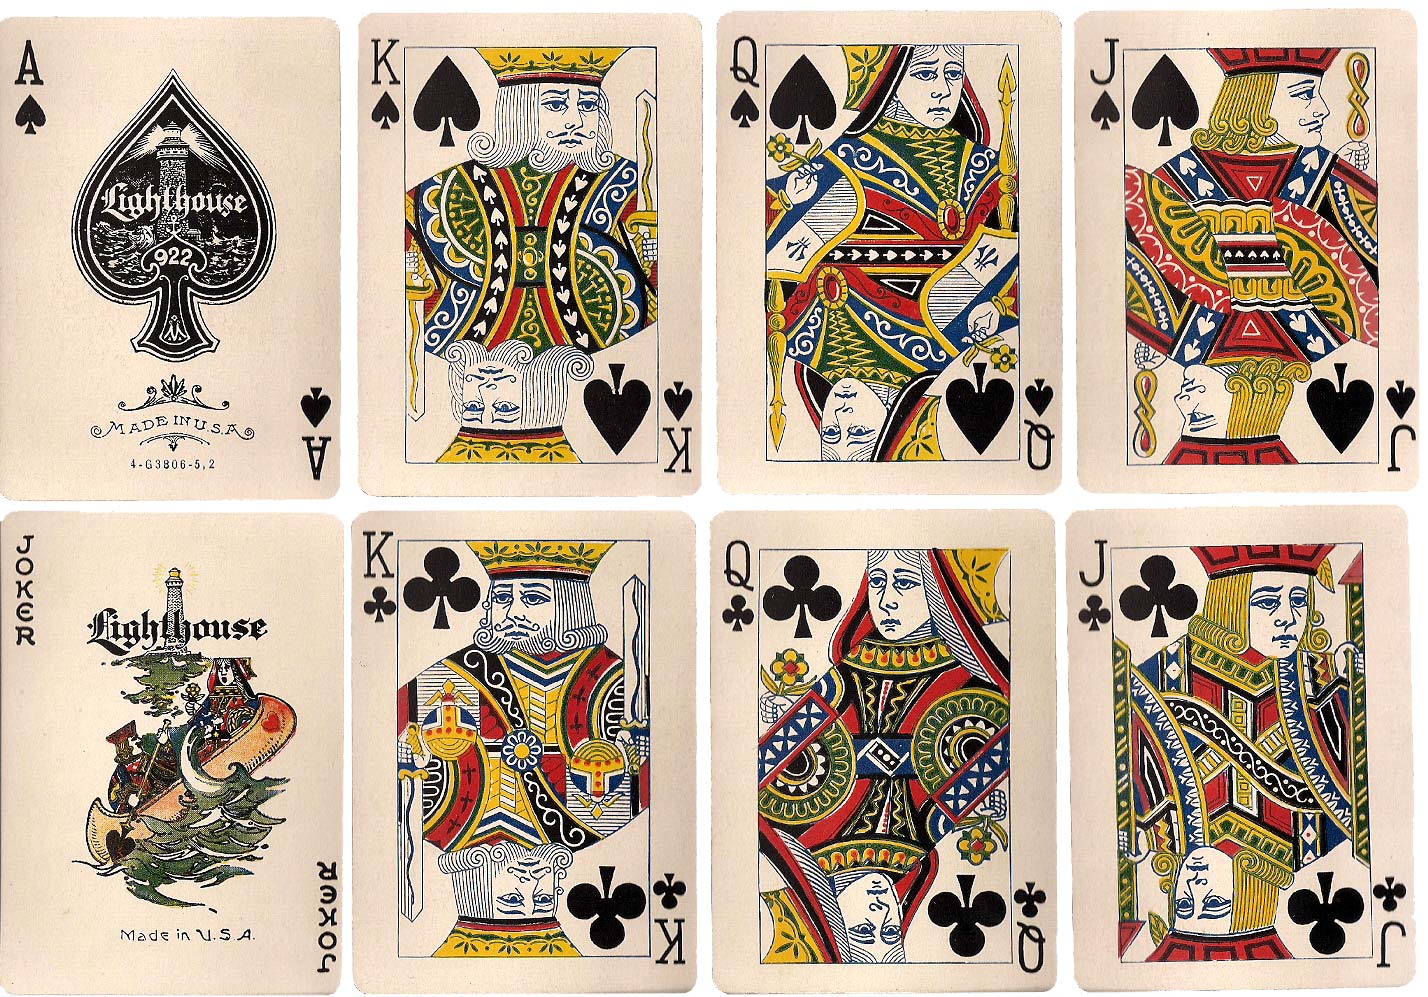  “Lighthouse No.922” playing cards by New York Consolidated Card Co., c.1925